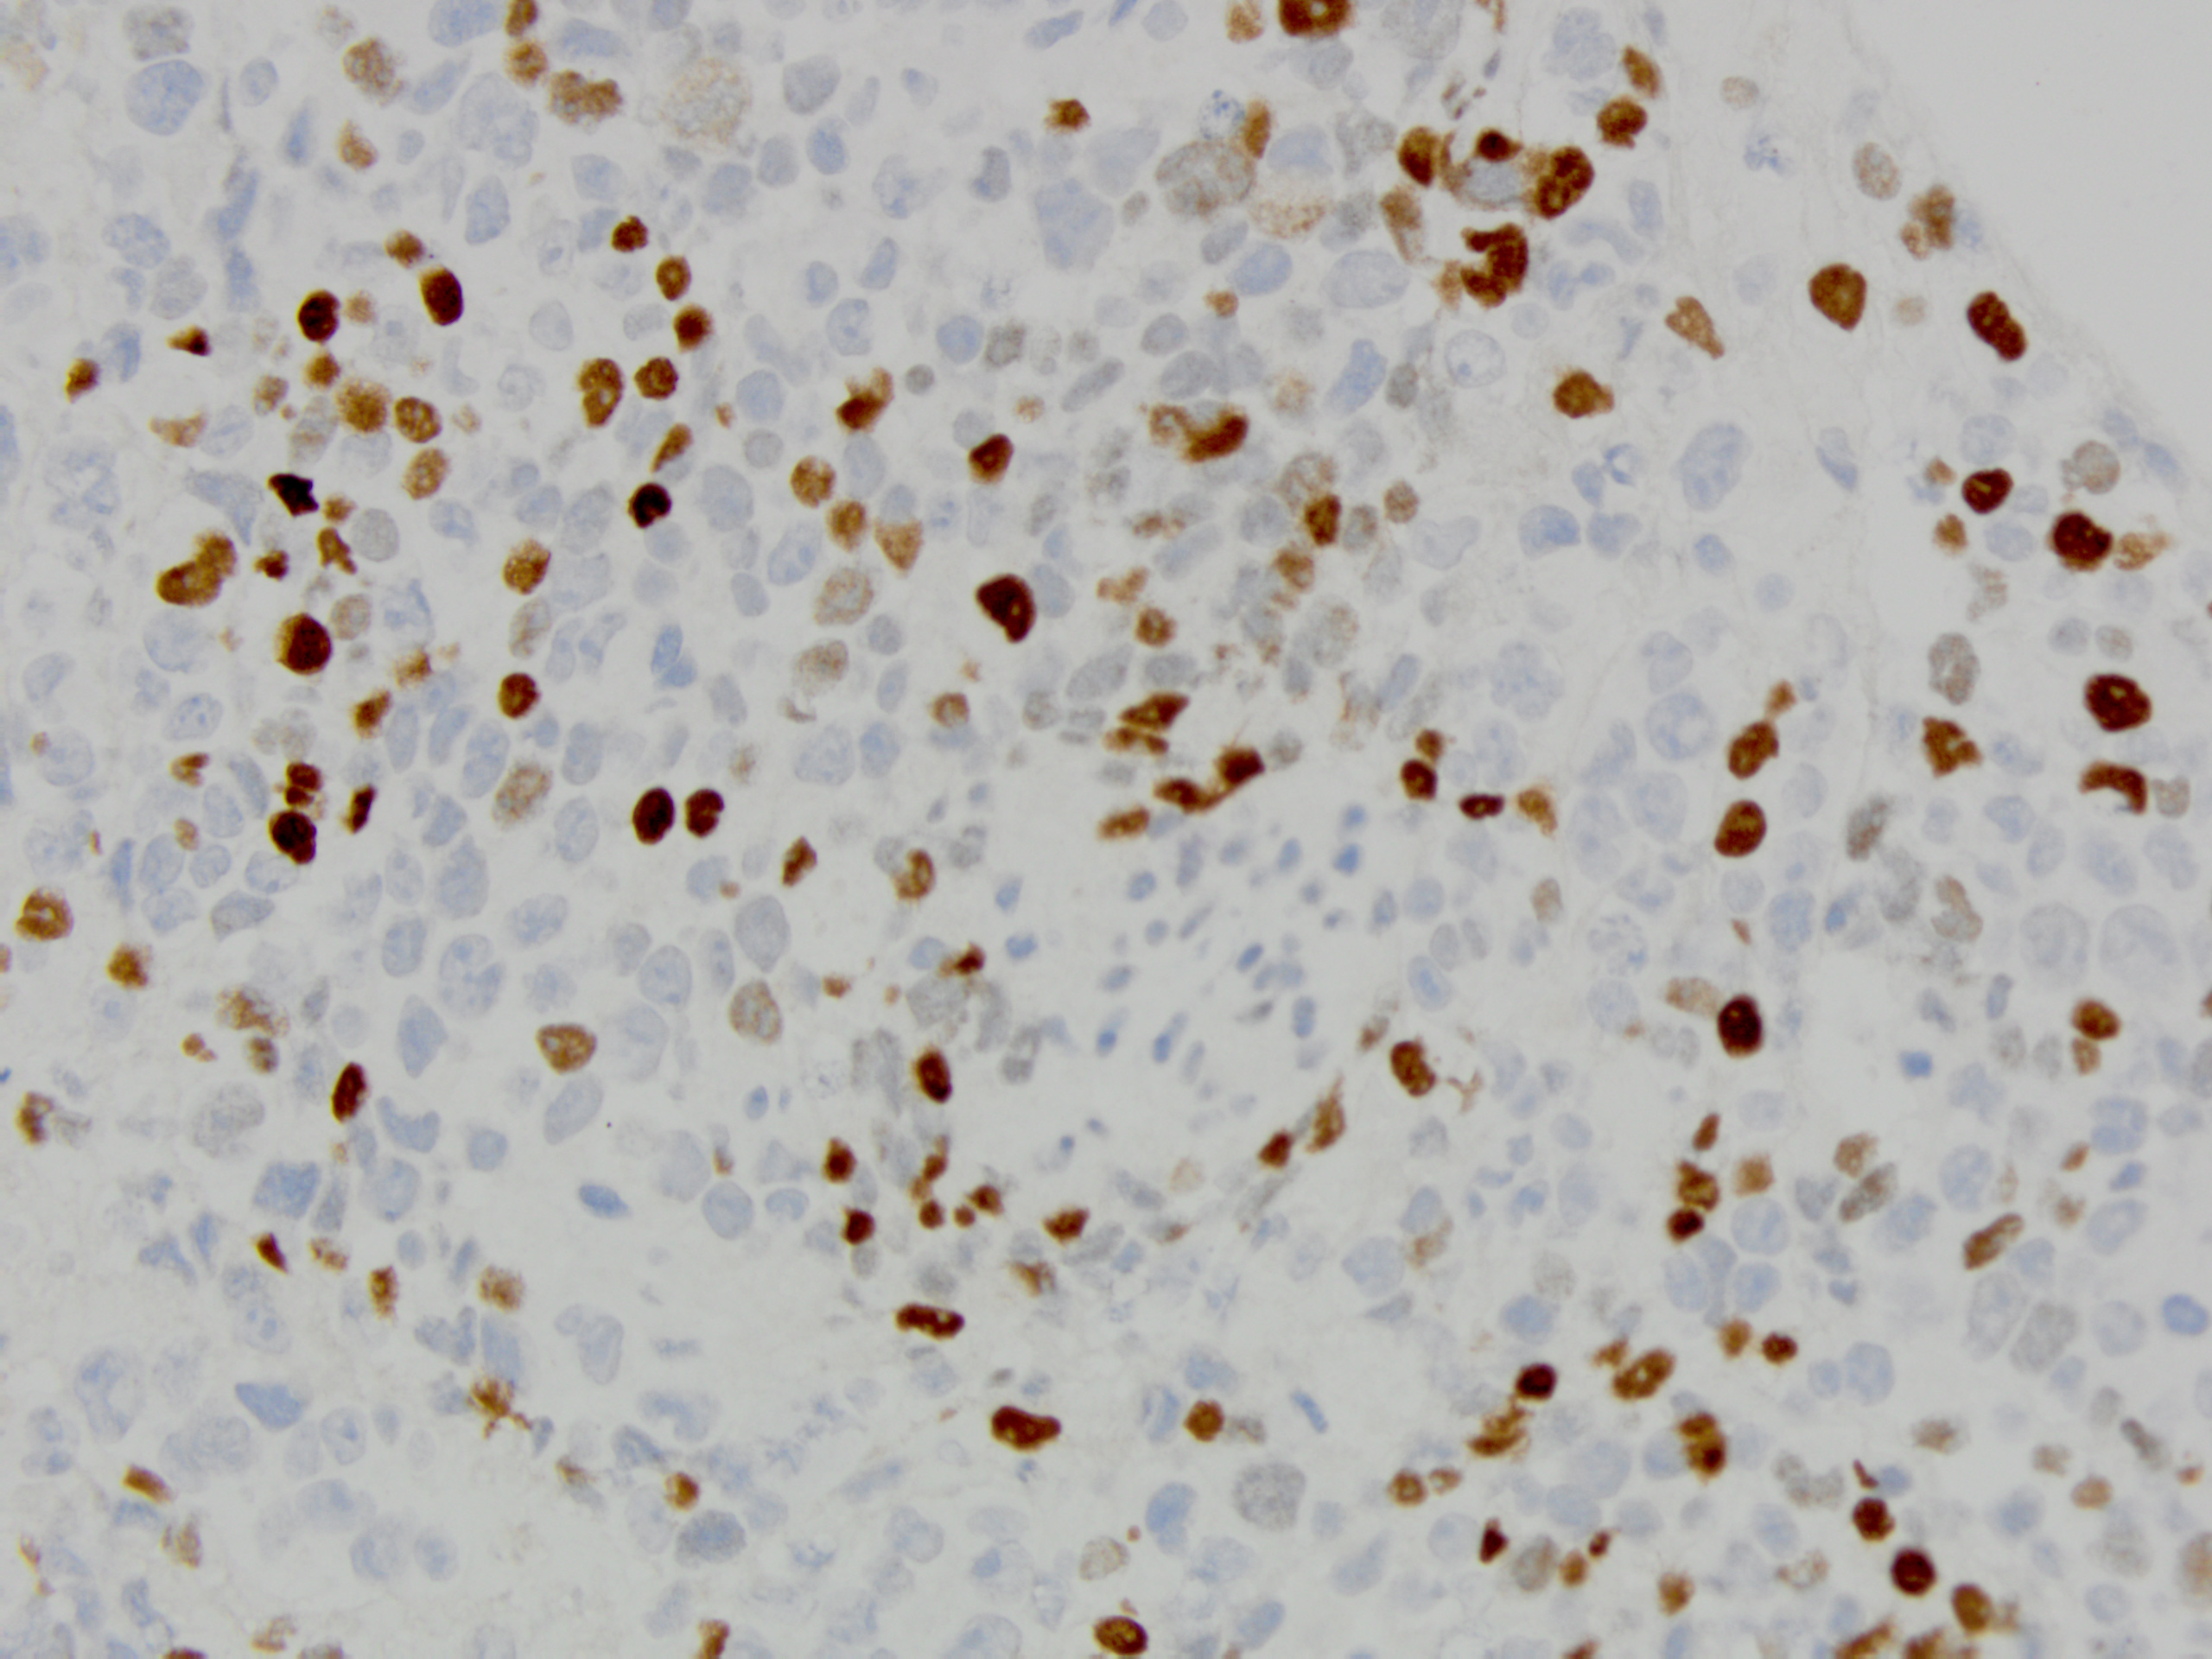 Figure 4: P40 immunohistochemical stain 40x magnification.